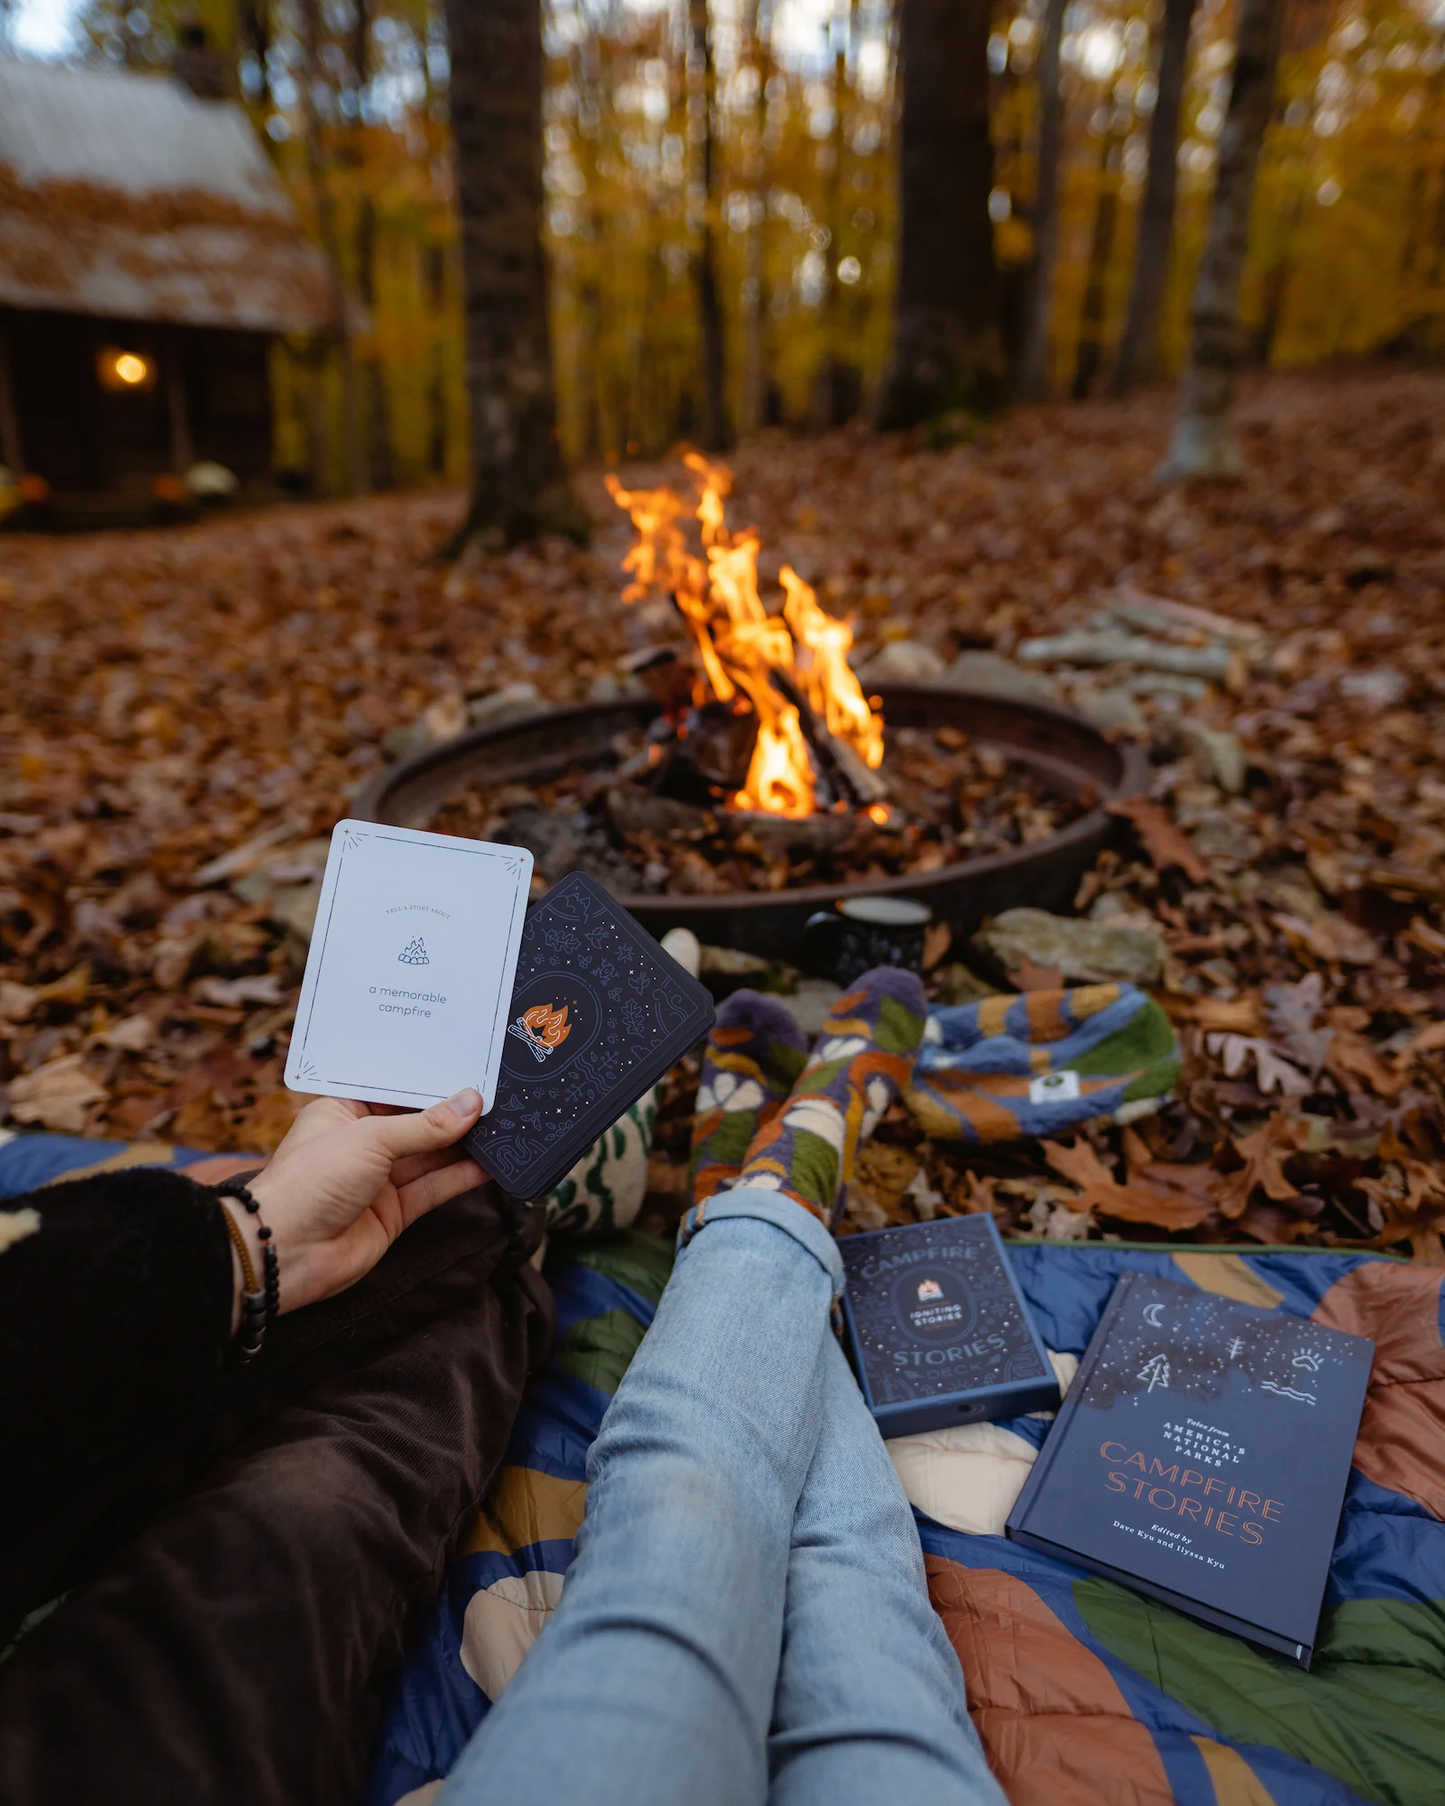 Parks Project Campfire Stories Deck: Prompts for Igniting Stories